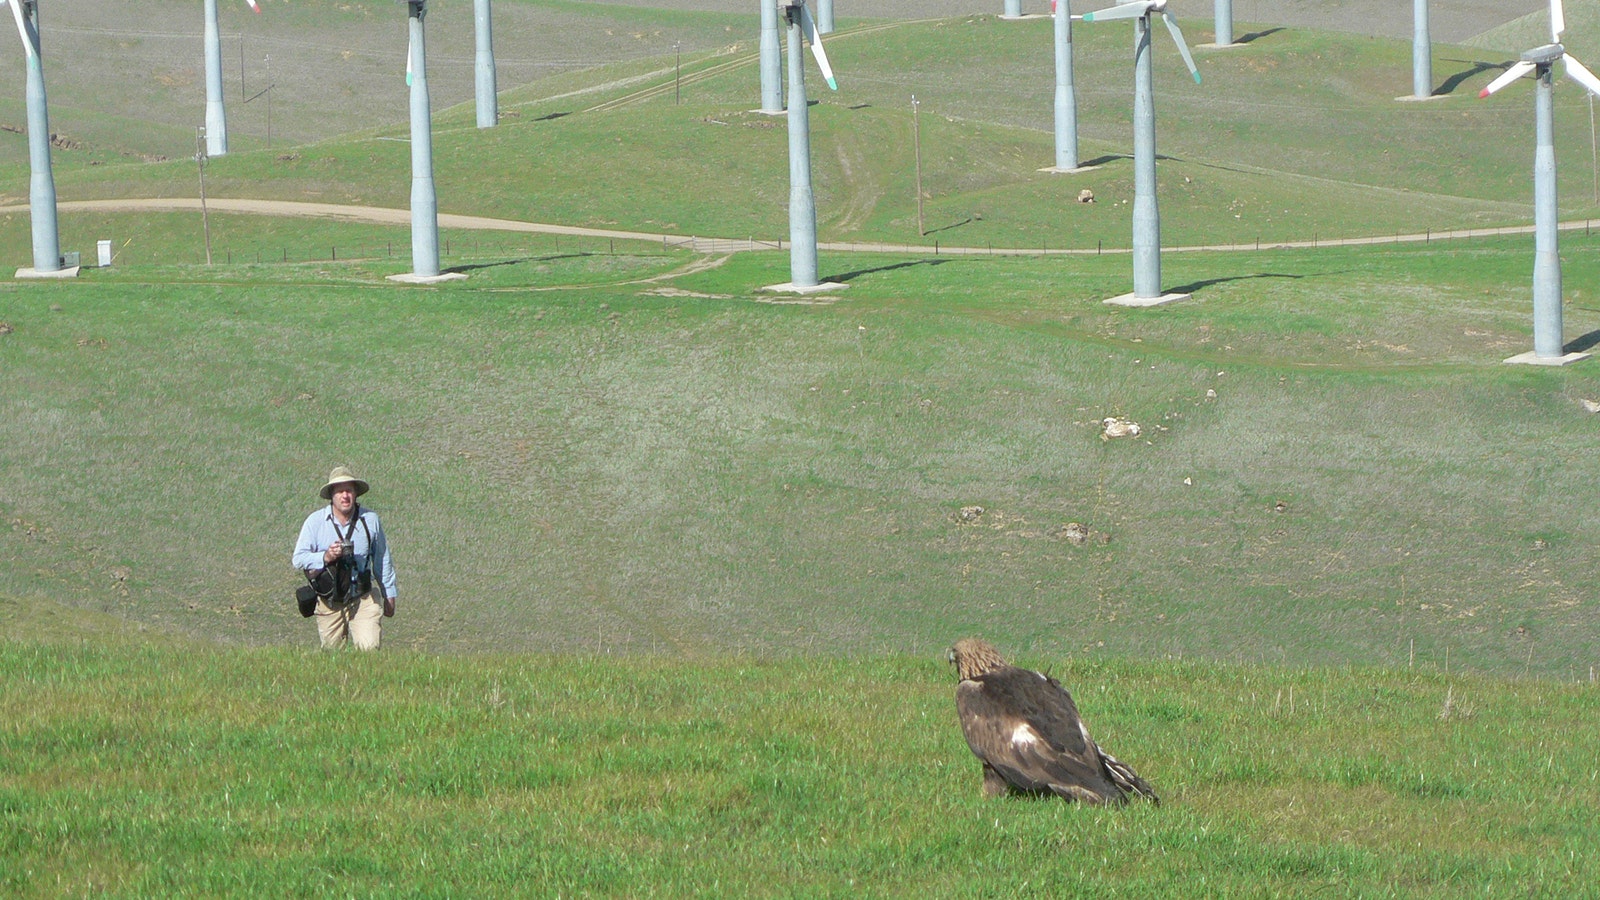 Ecology expert Shawn Smallwood walking through a wind farm, greeted by a live bird — something that he doesn’t usually see given the nature of his work to count bird carcasses caused by wind turbines.